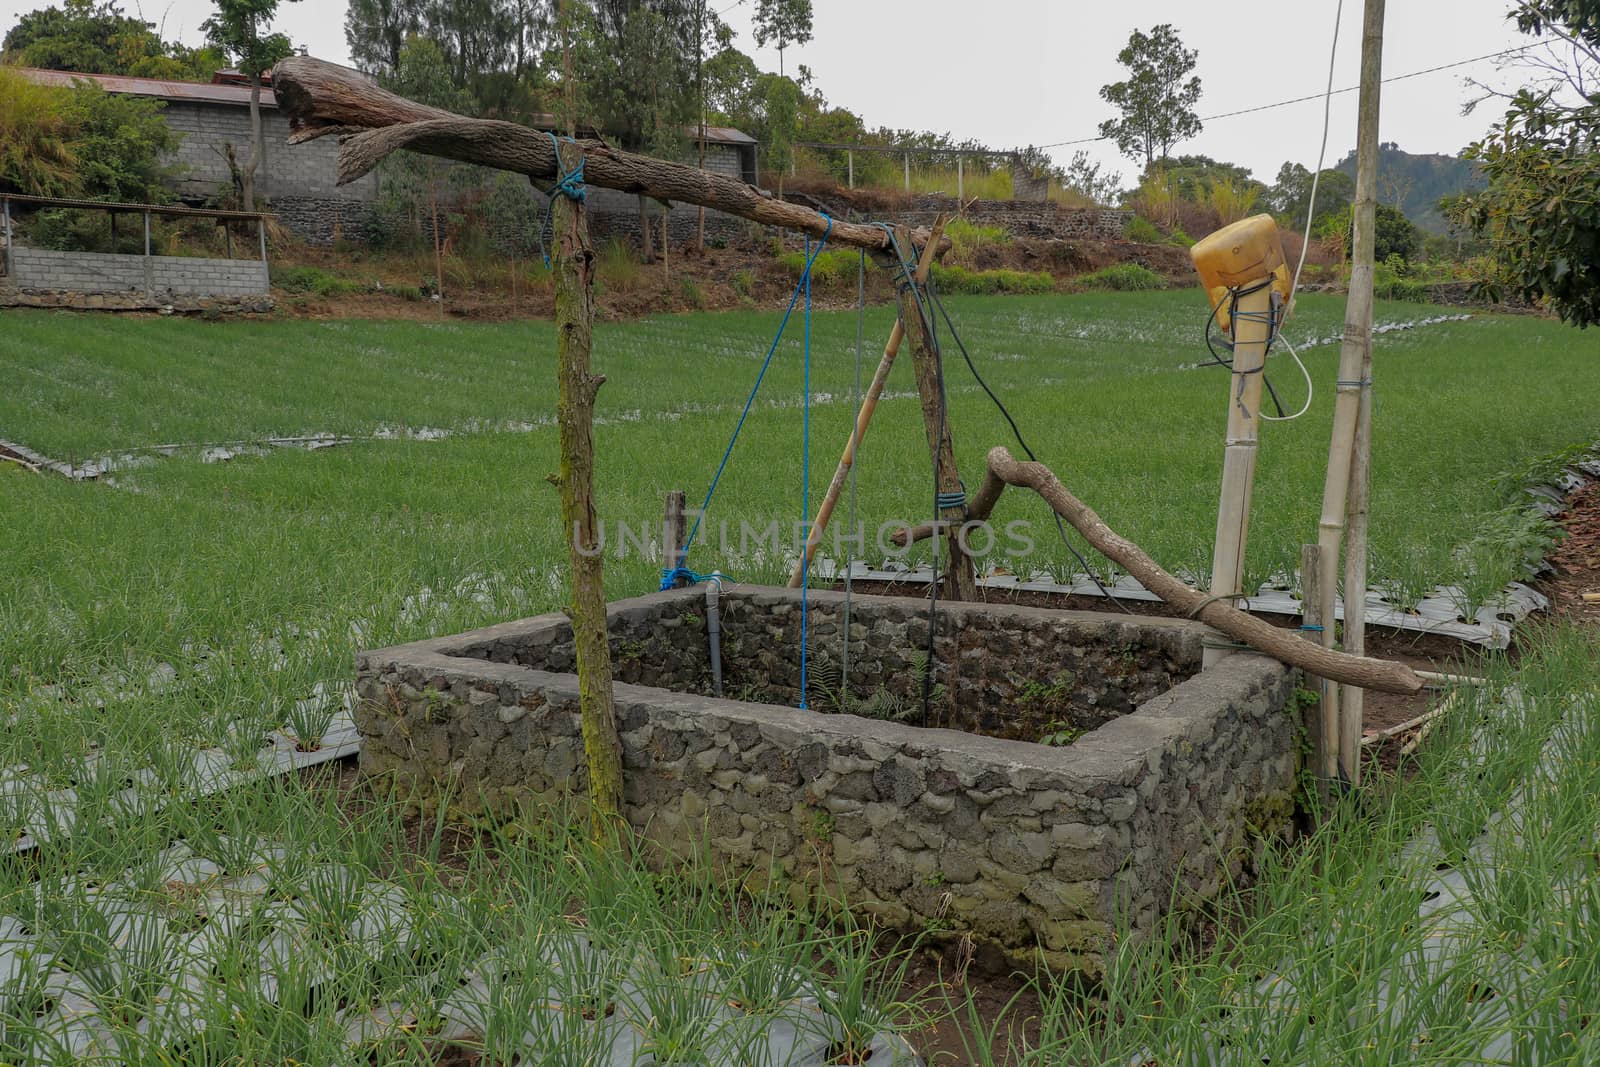 Old well with winch in the middle of an onion field. Wall wells made of stones and mortar. Source of water for irrigation of poor farmers' agricultural crops in the mountains.